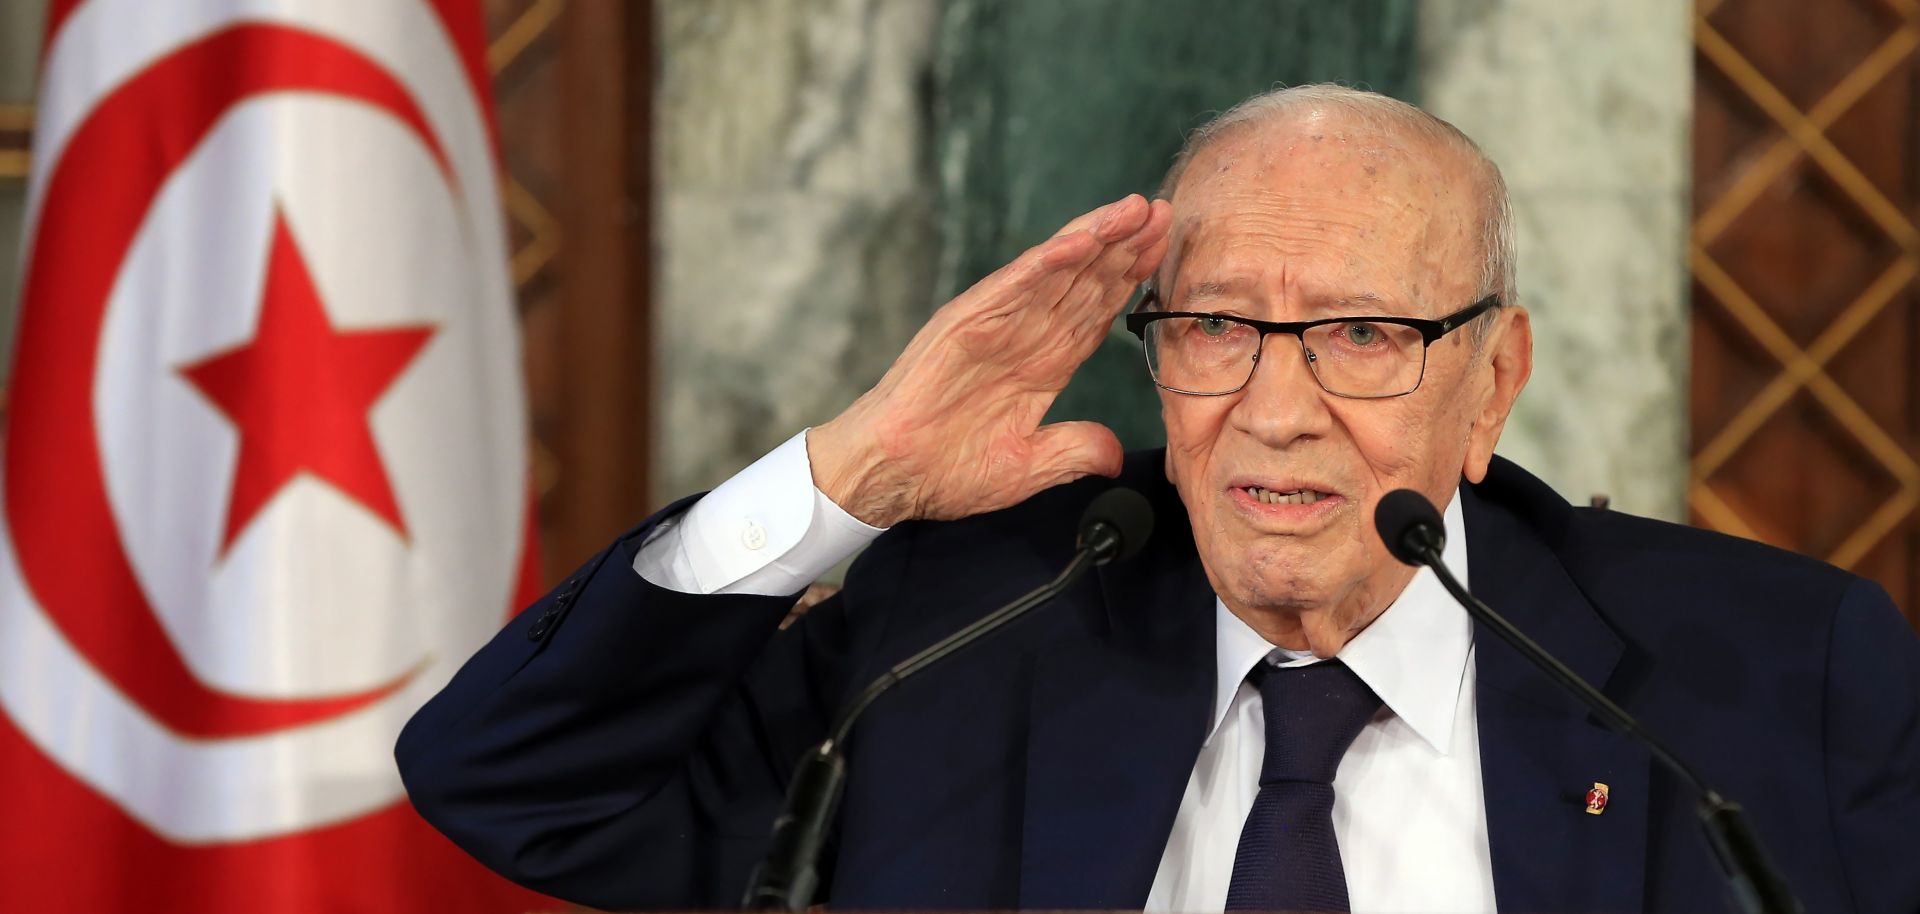 This photo shows Tunisian President Beji Caid Essebsi, who died July 25 at age 92.